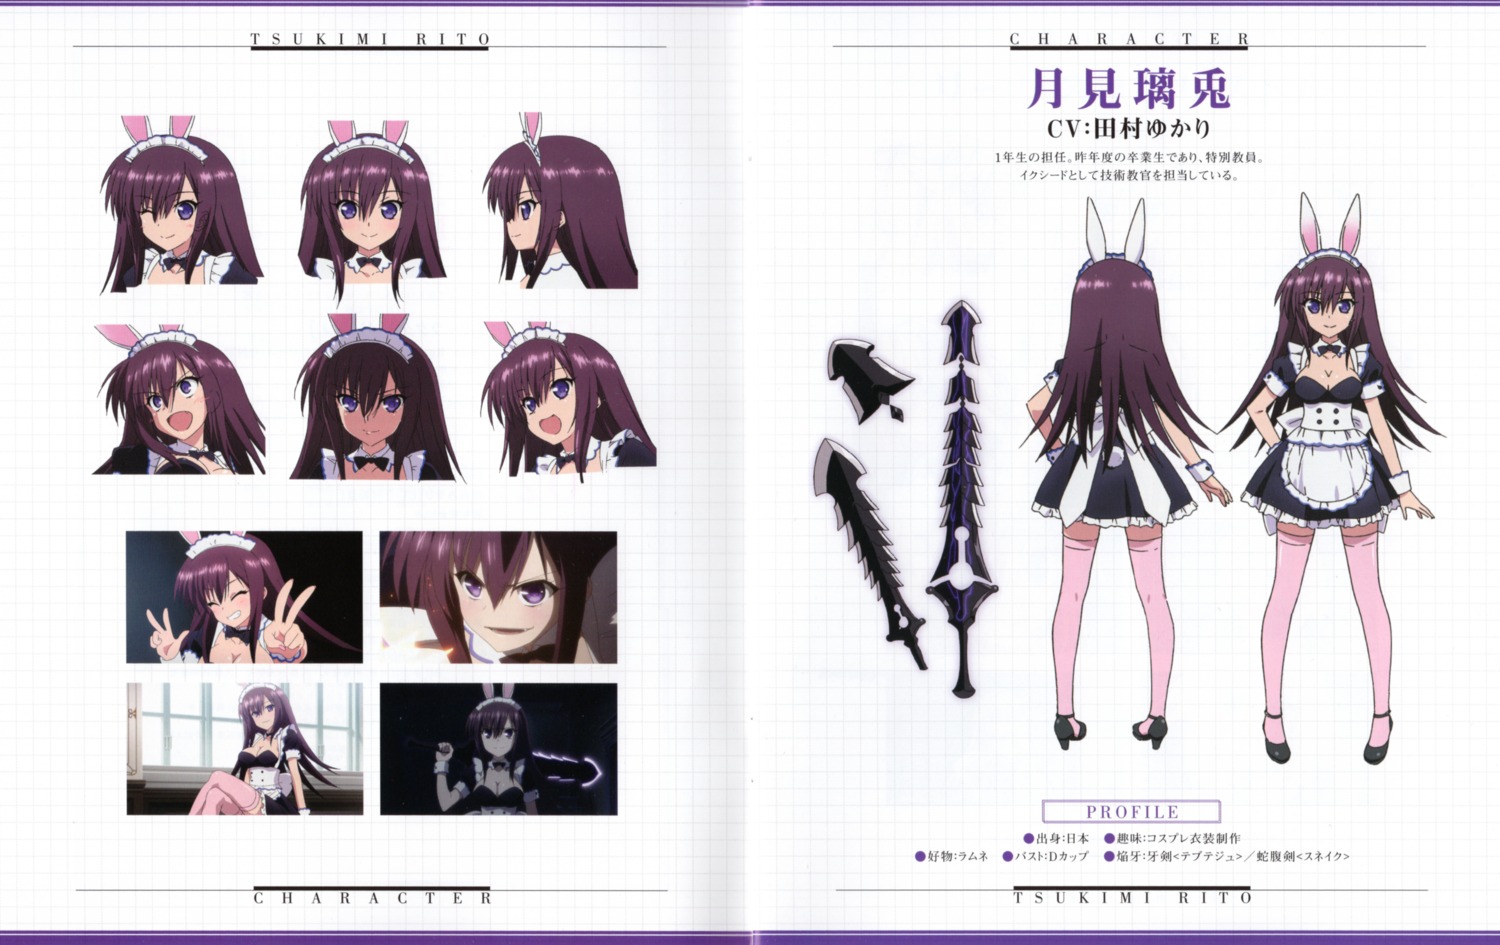 Absolute Duo - The Character design of Absolute Duo